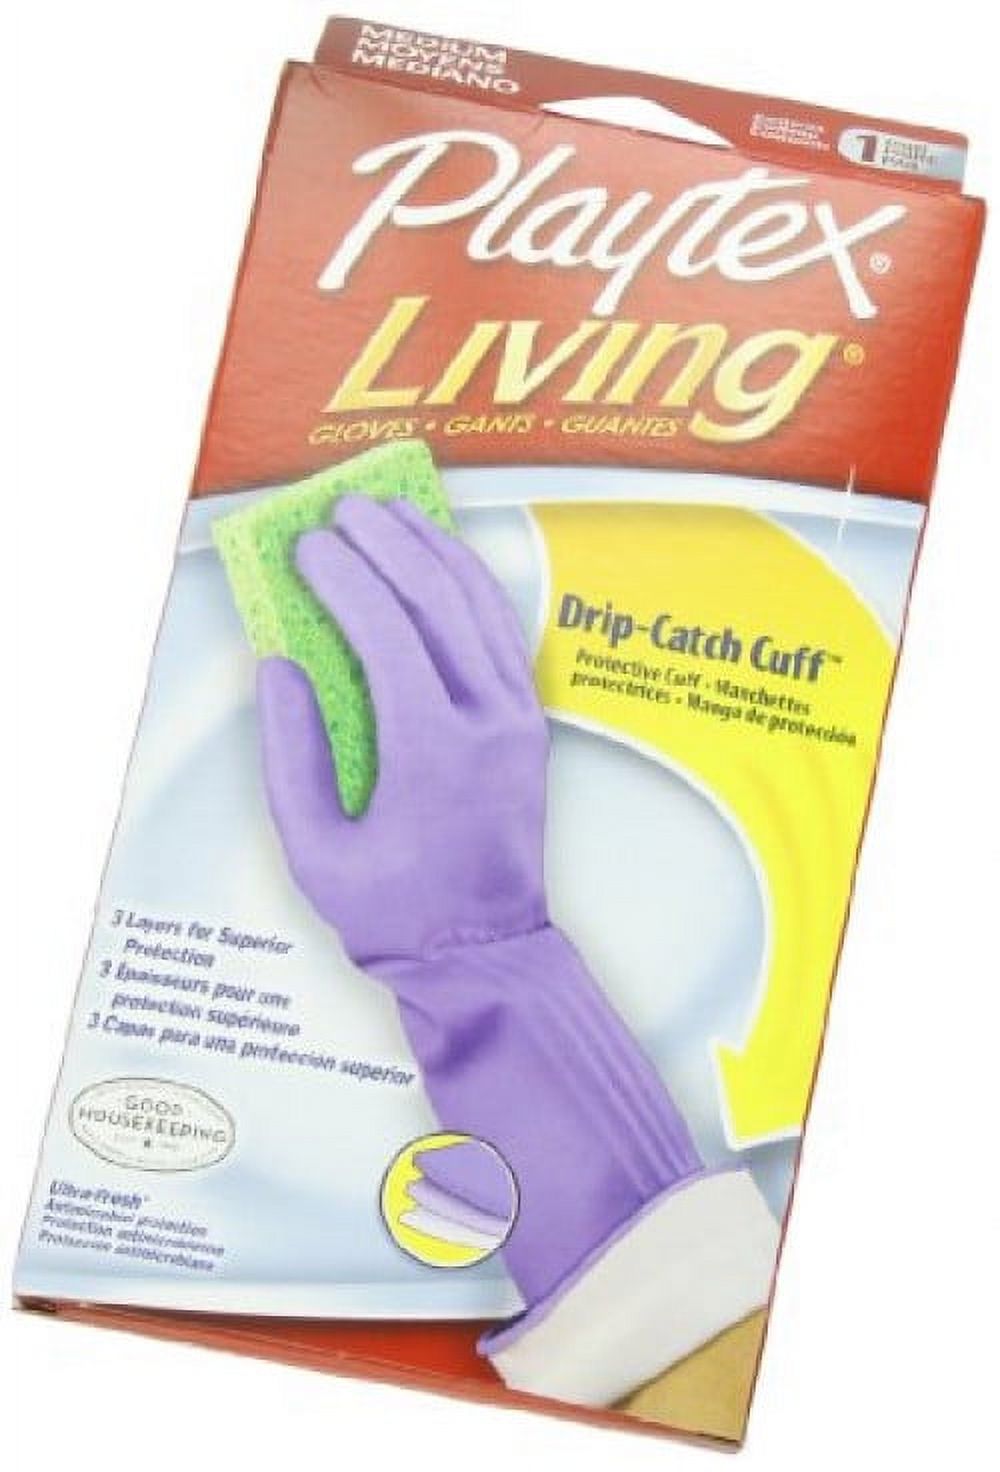 Playtex Living Reusable Gloves With Drip-Catch Cuff Medium - 1 Pair - image 3 of 4